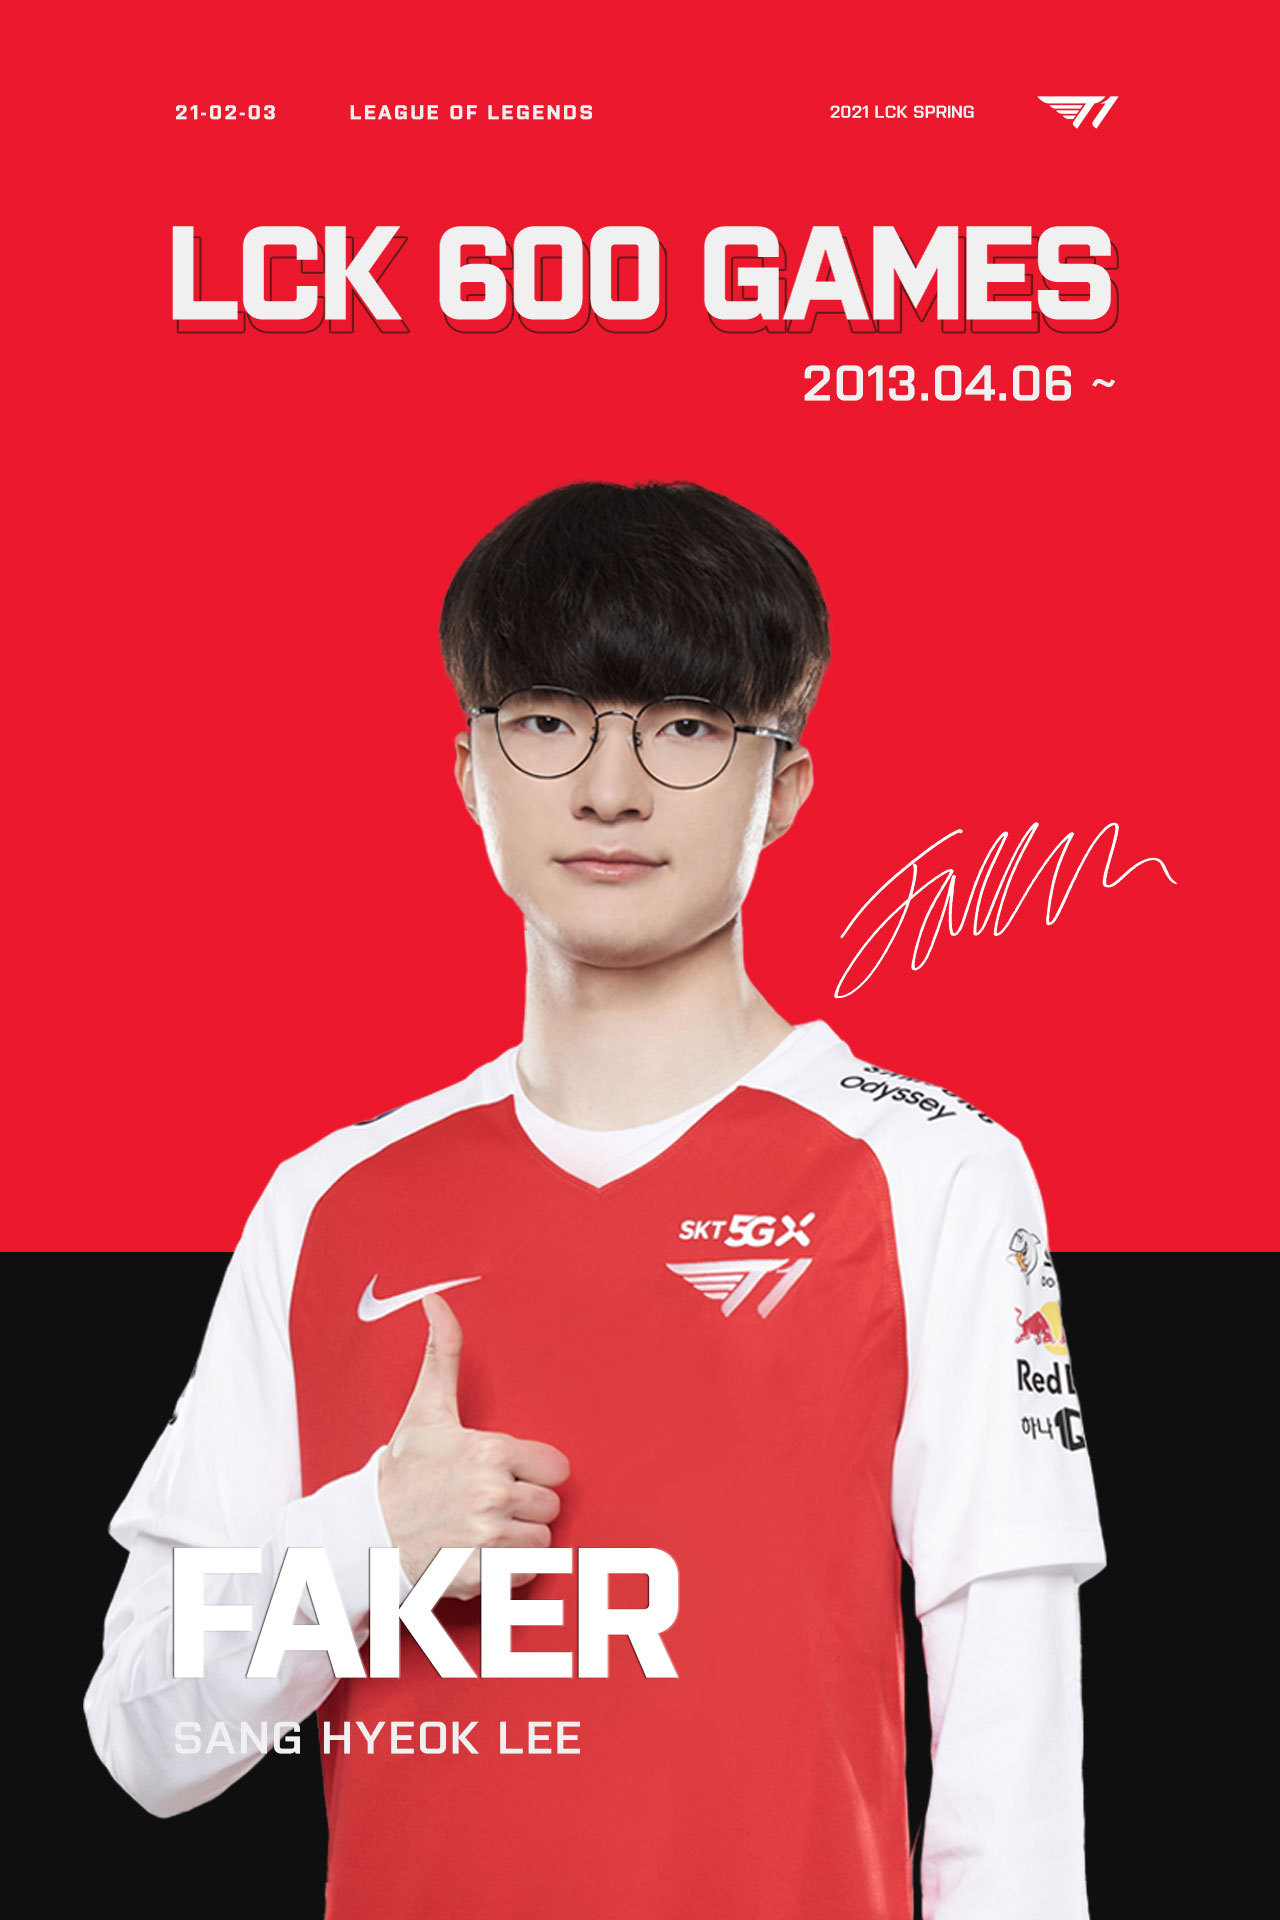 Faker plays his 600th game in the LCK on Feb. 3. (Riot Games)